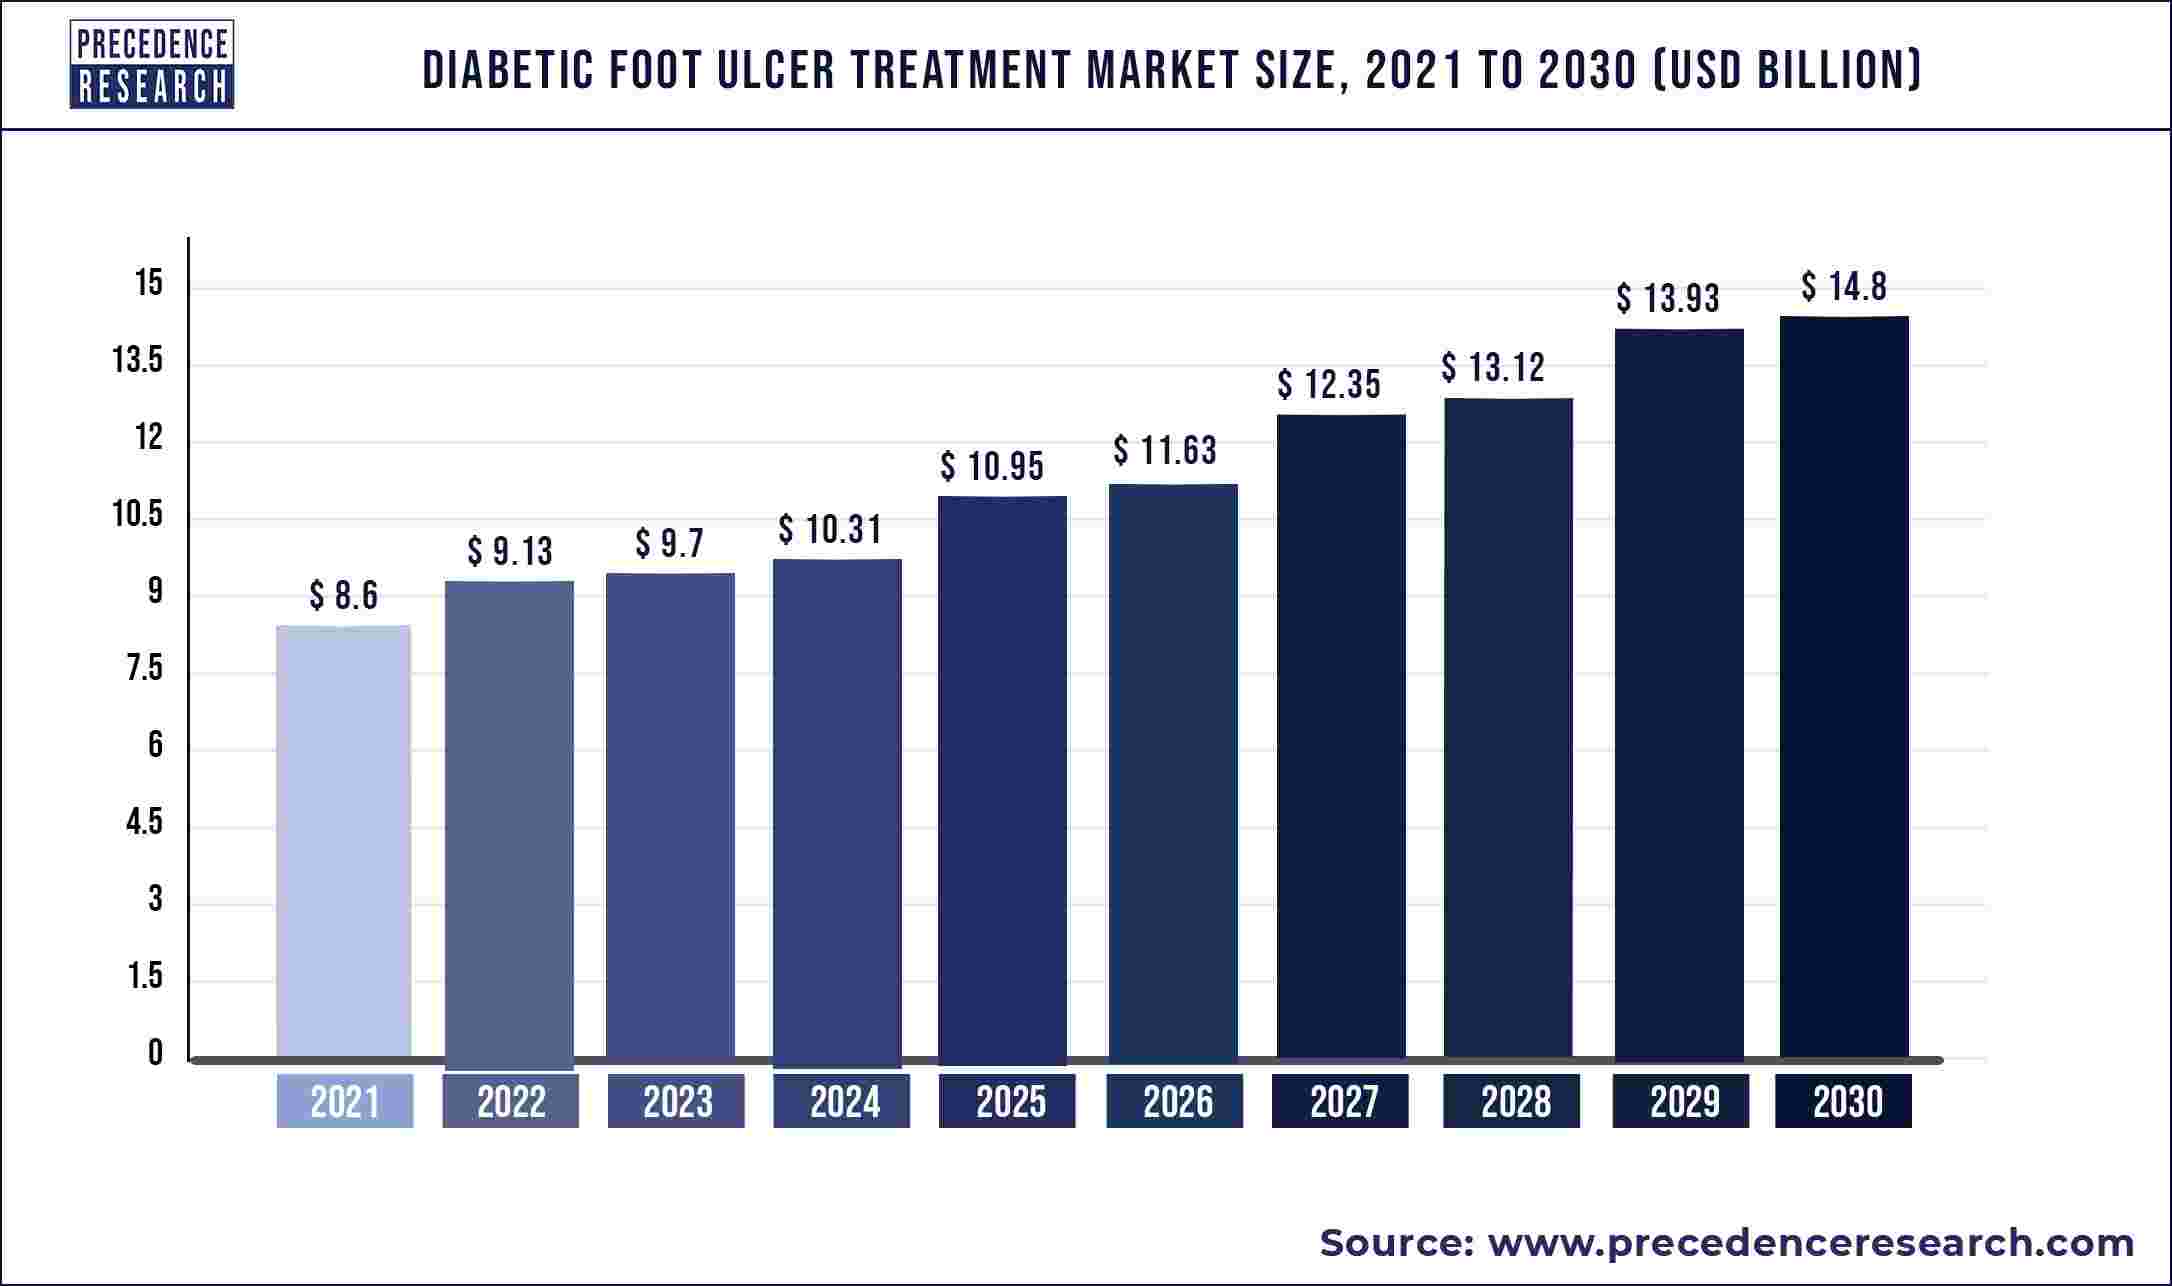 Diabetic Foot Ulcer Treatment Market Size to Exceed US$ 14.8 Billion by 2030 | Says Precedence Research